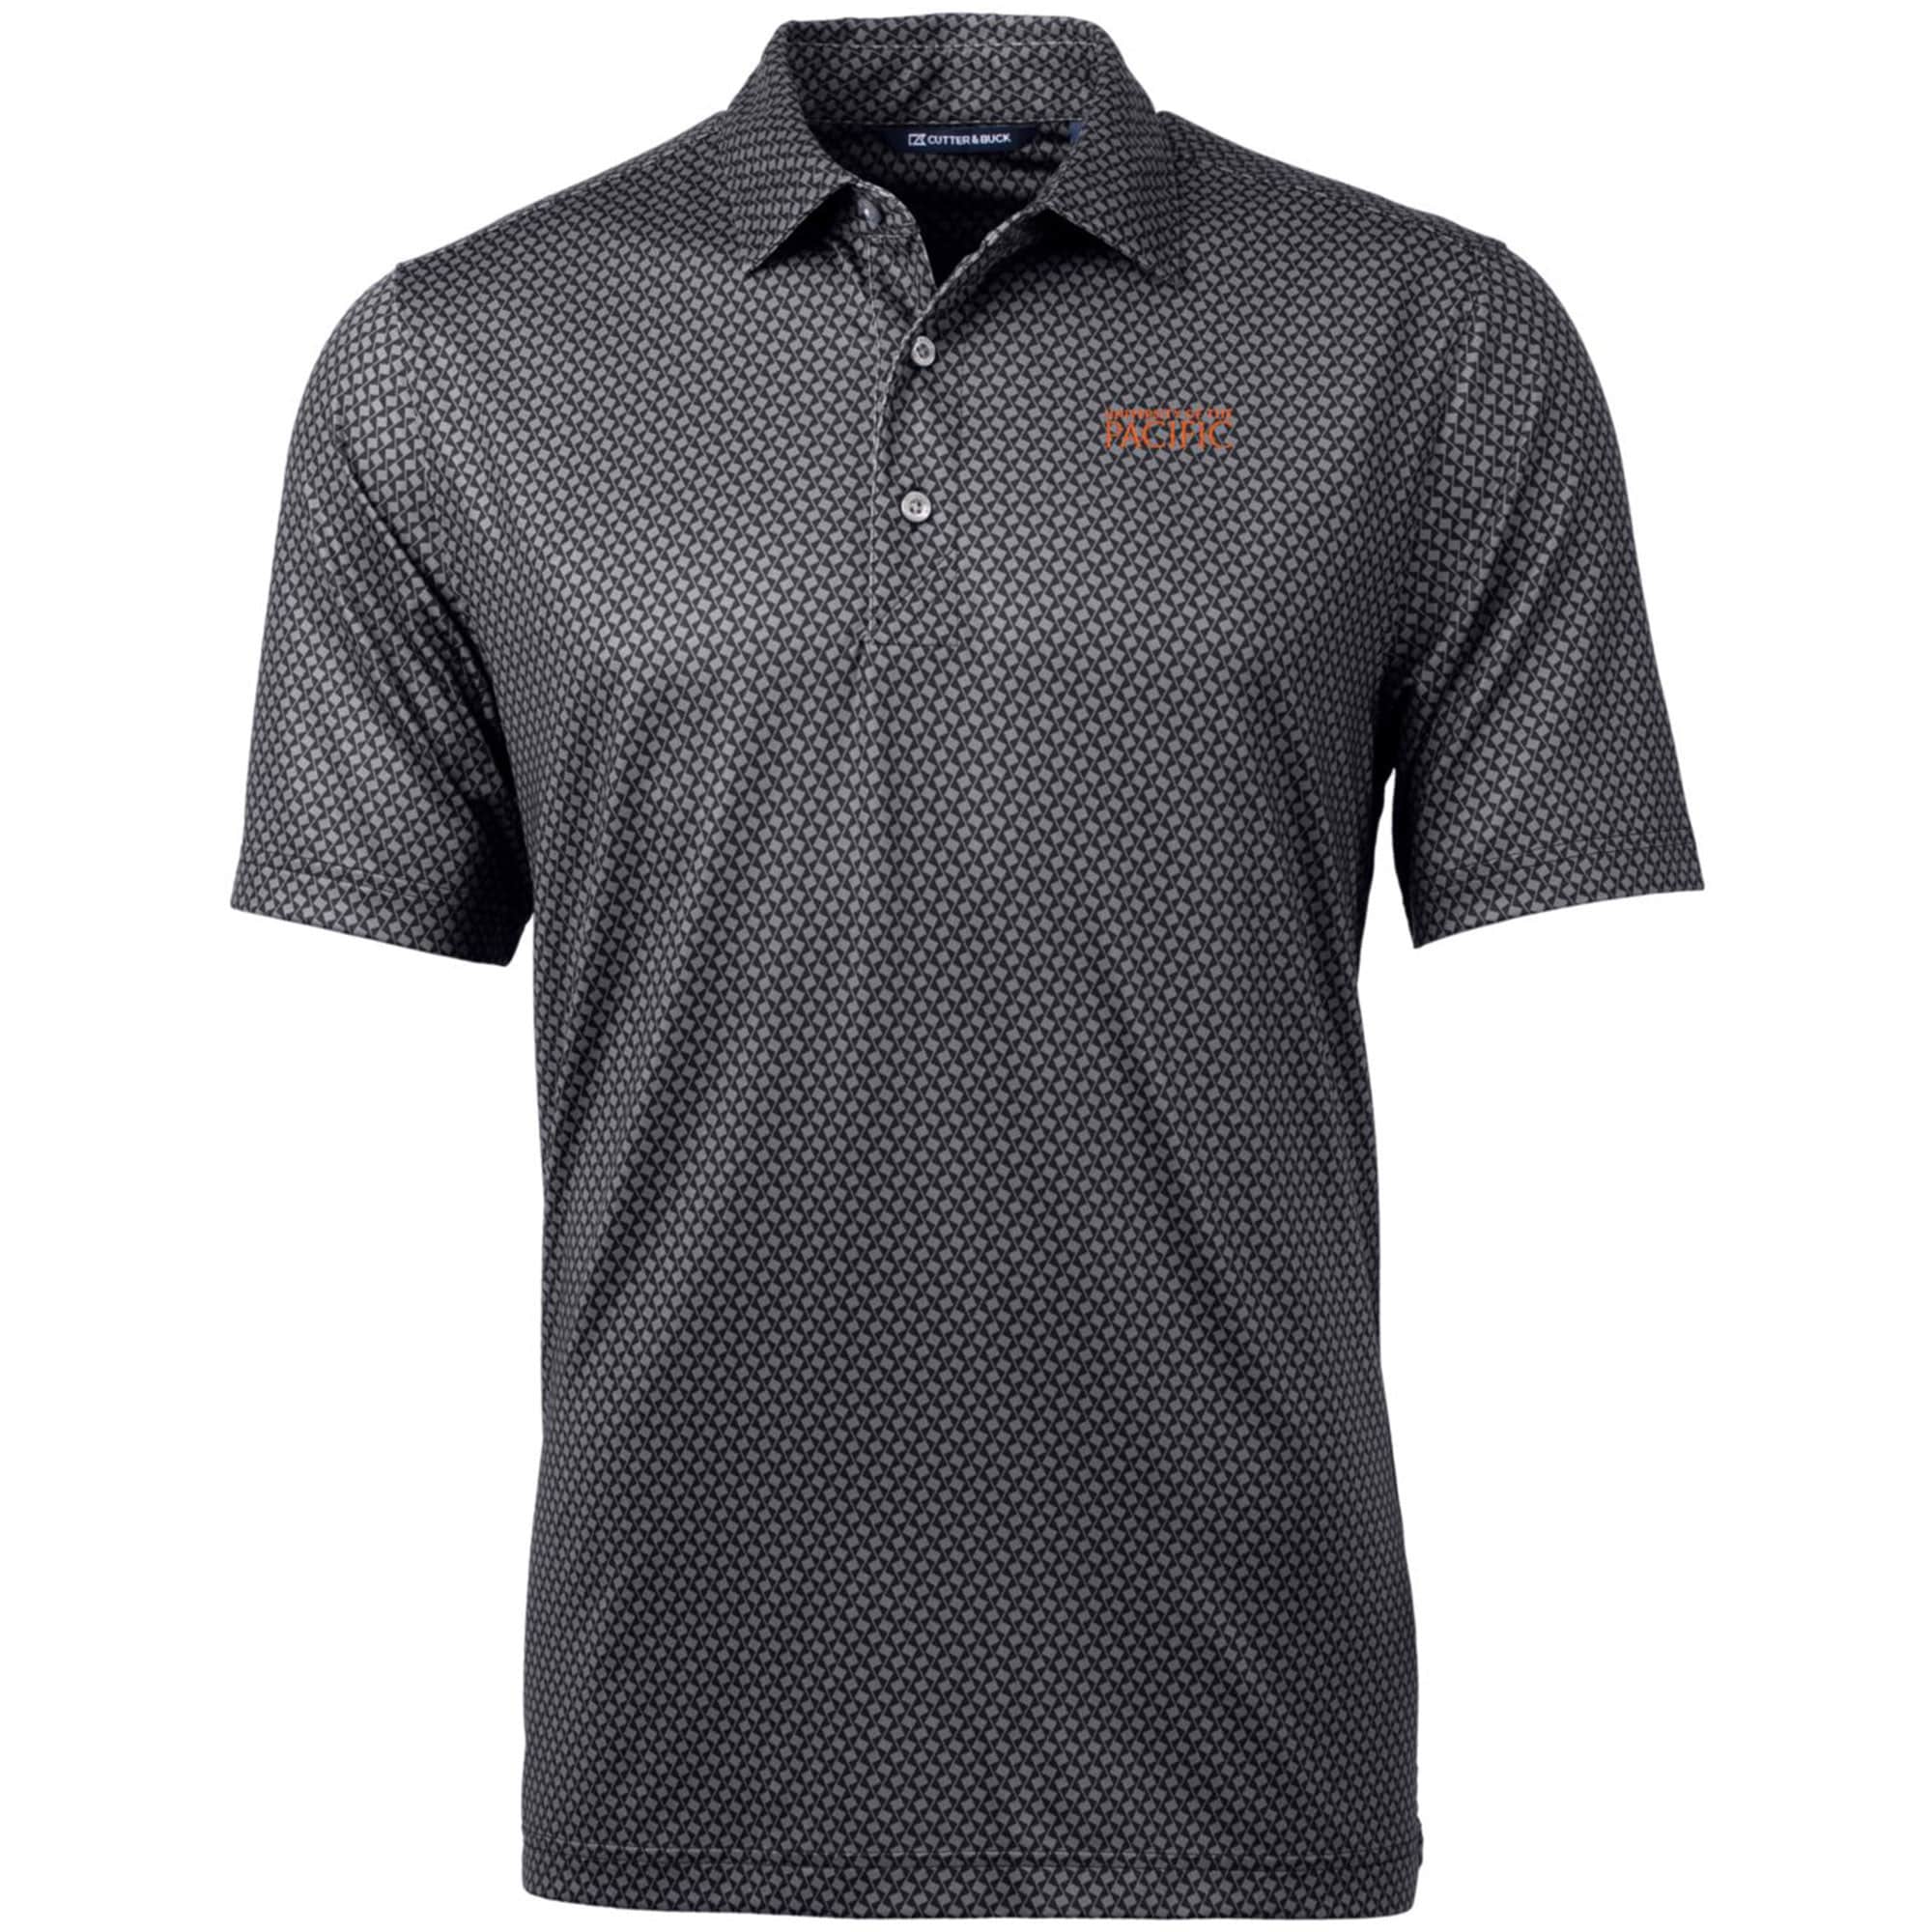 Men's Cutter & Buck Black Pacific Tigers Big & Tall Pike Banner Print Polo - image 2 of 3